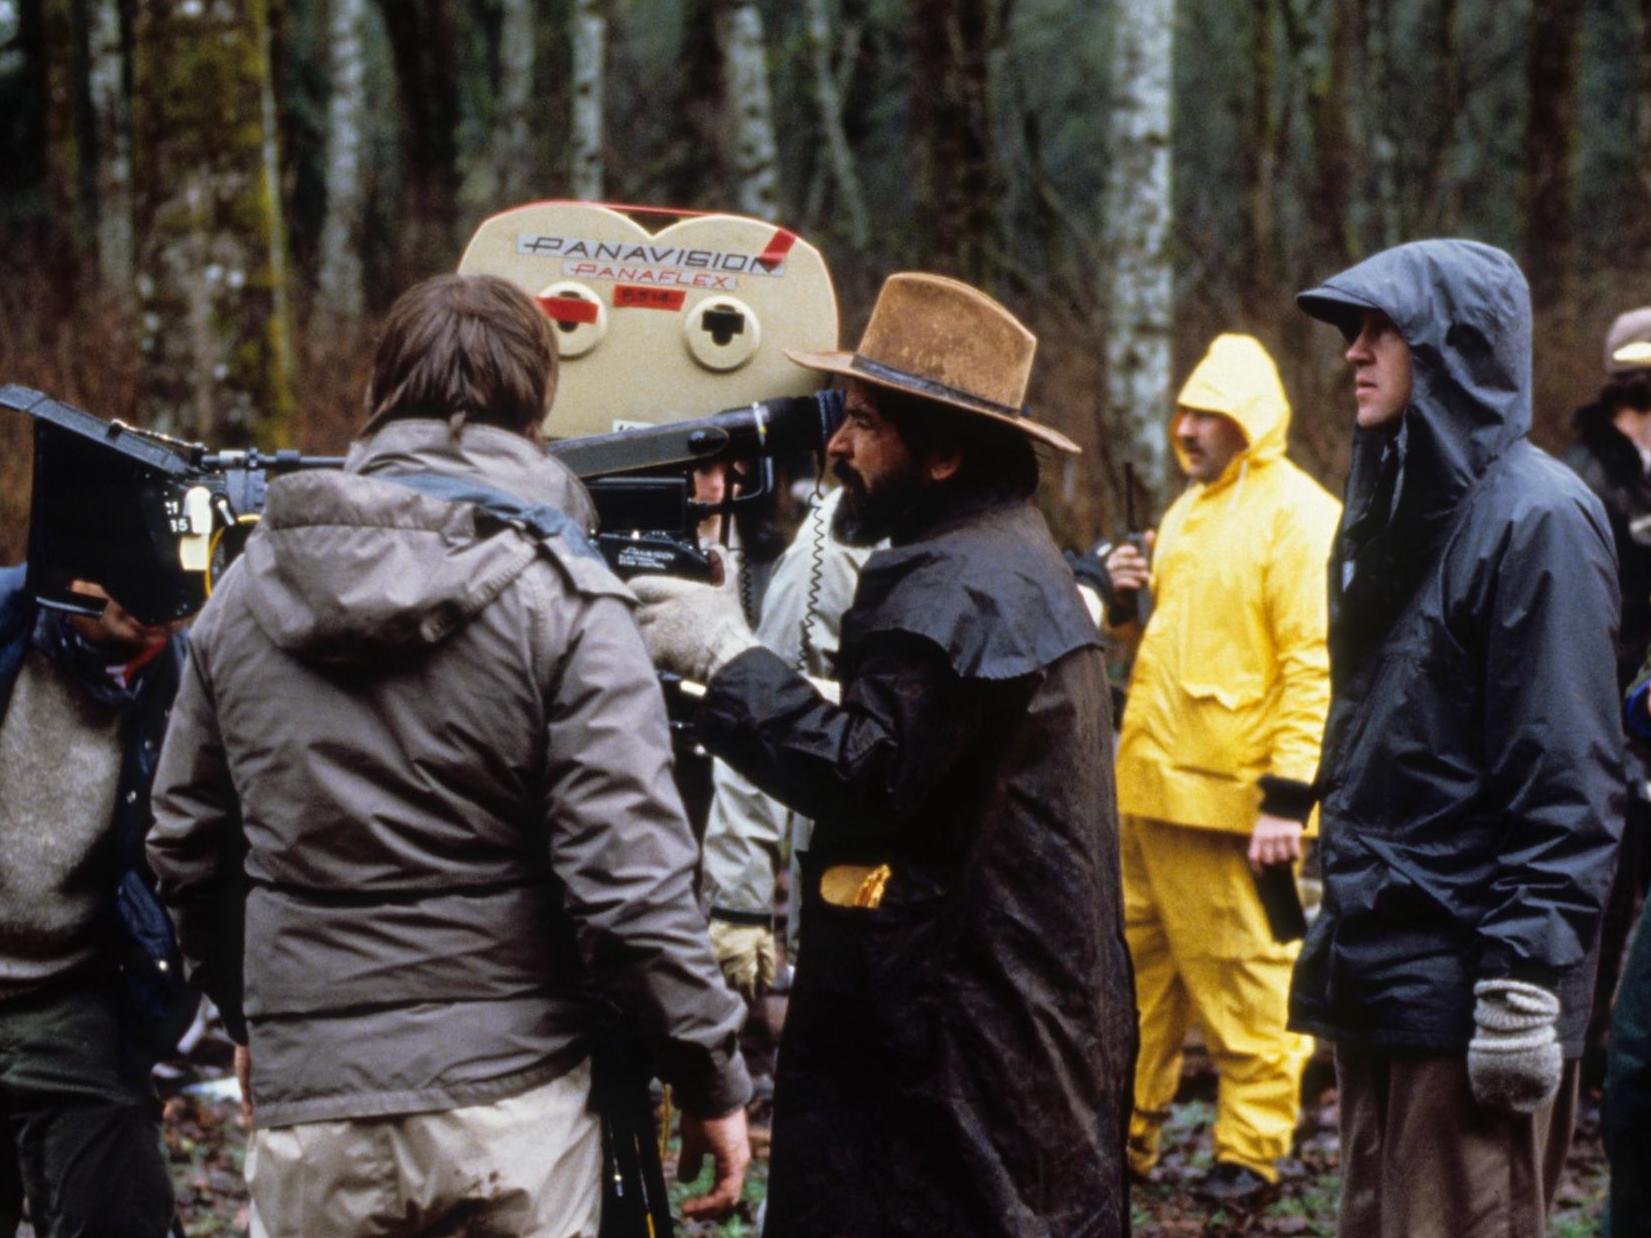 David Lynch and his crew filming in the show’s?woodland setting